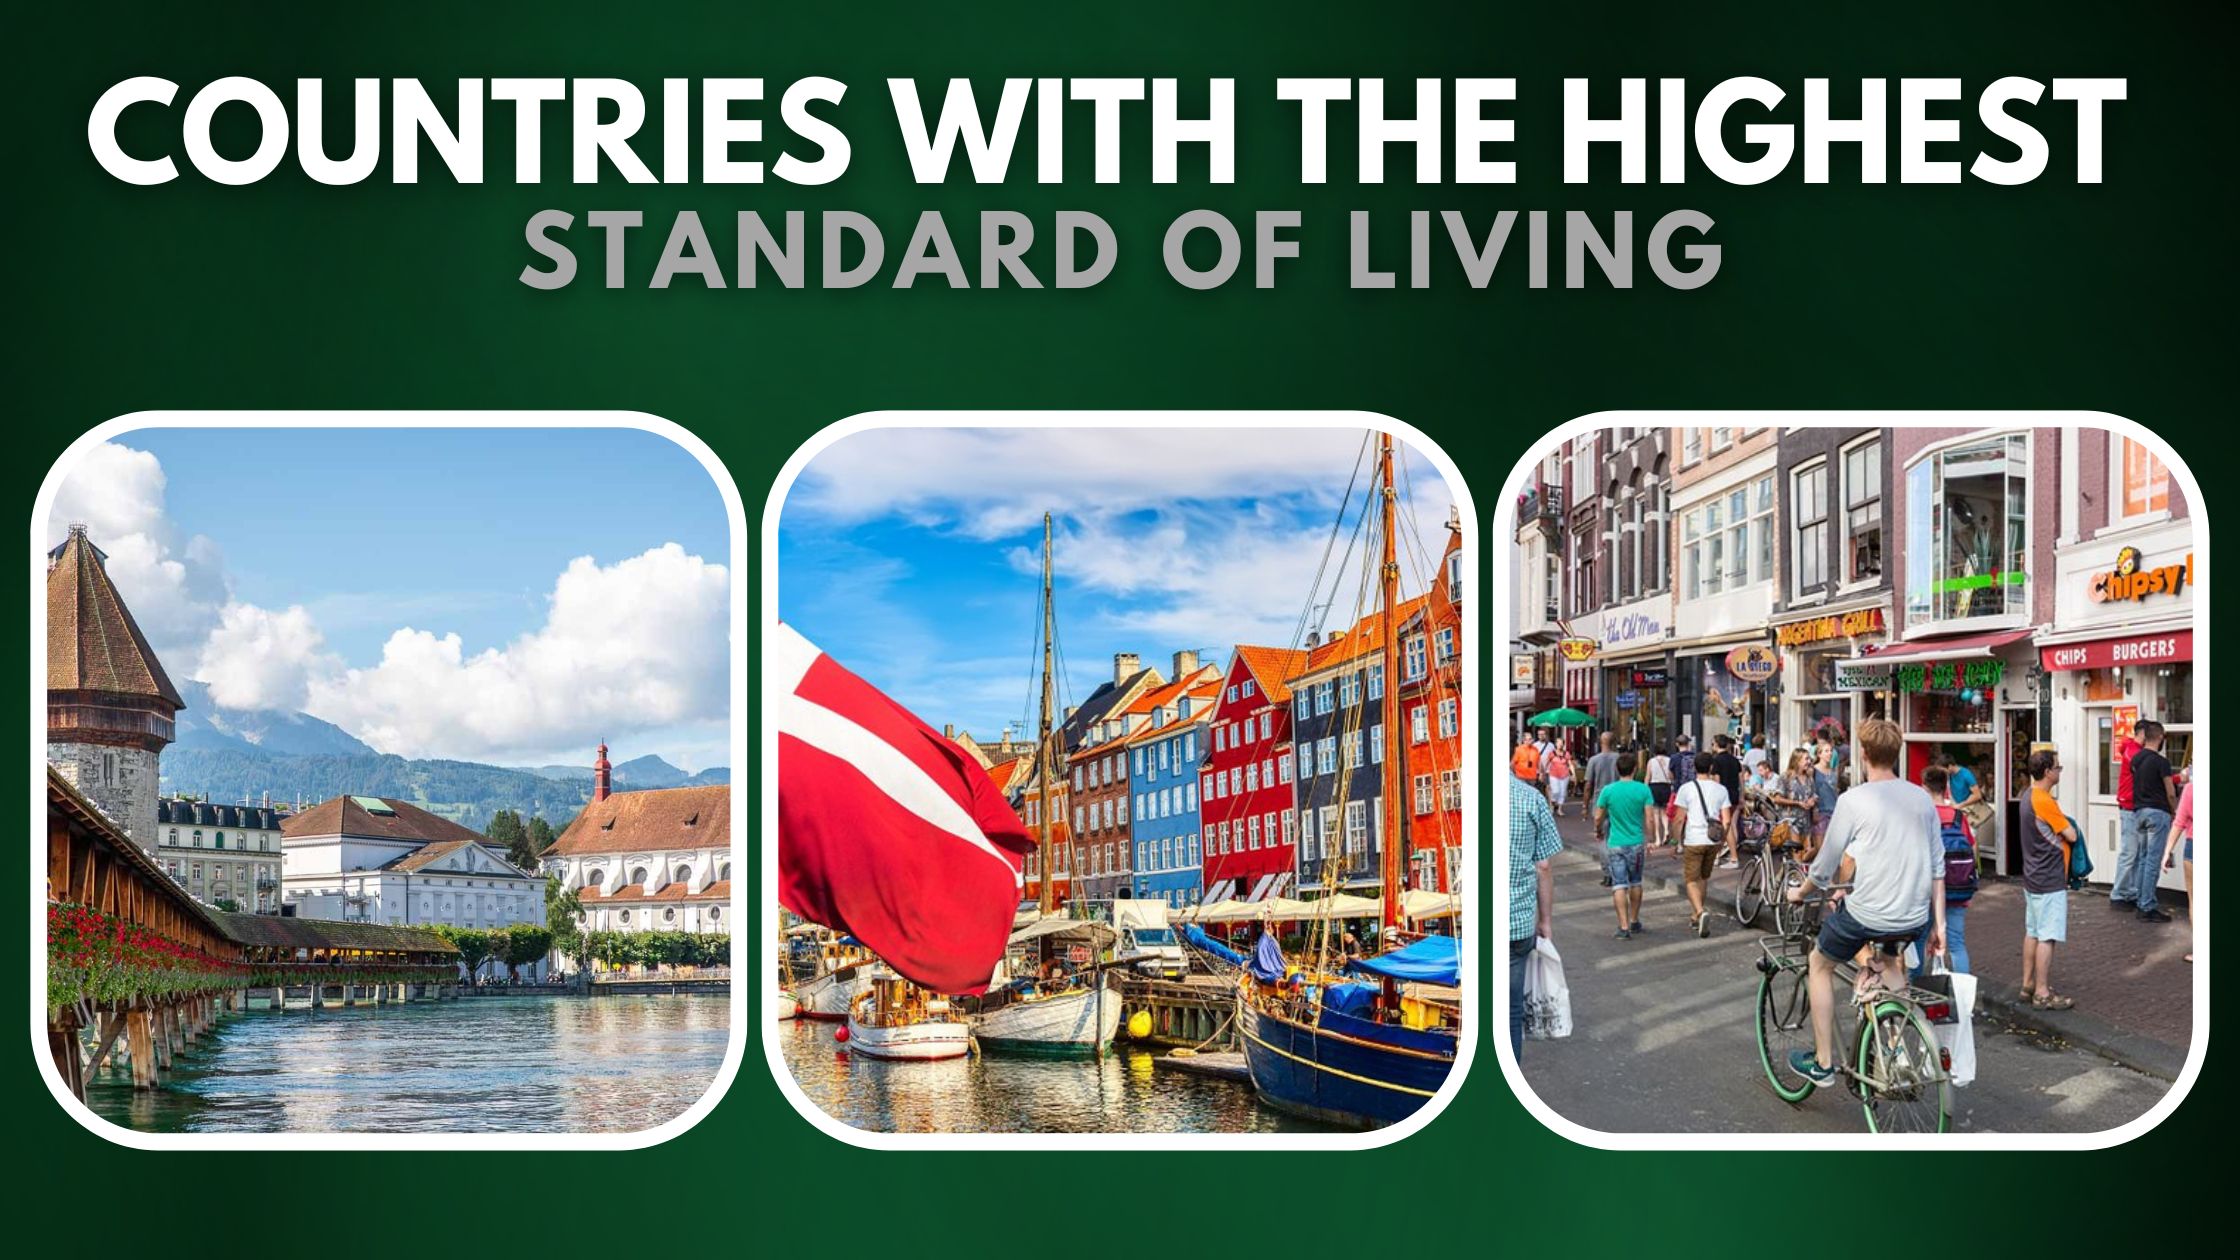 Countries With The Highest Standard of Living